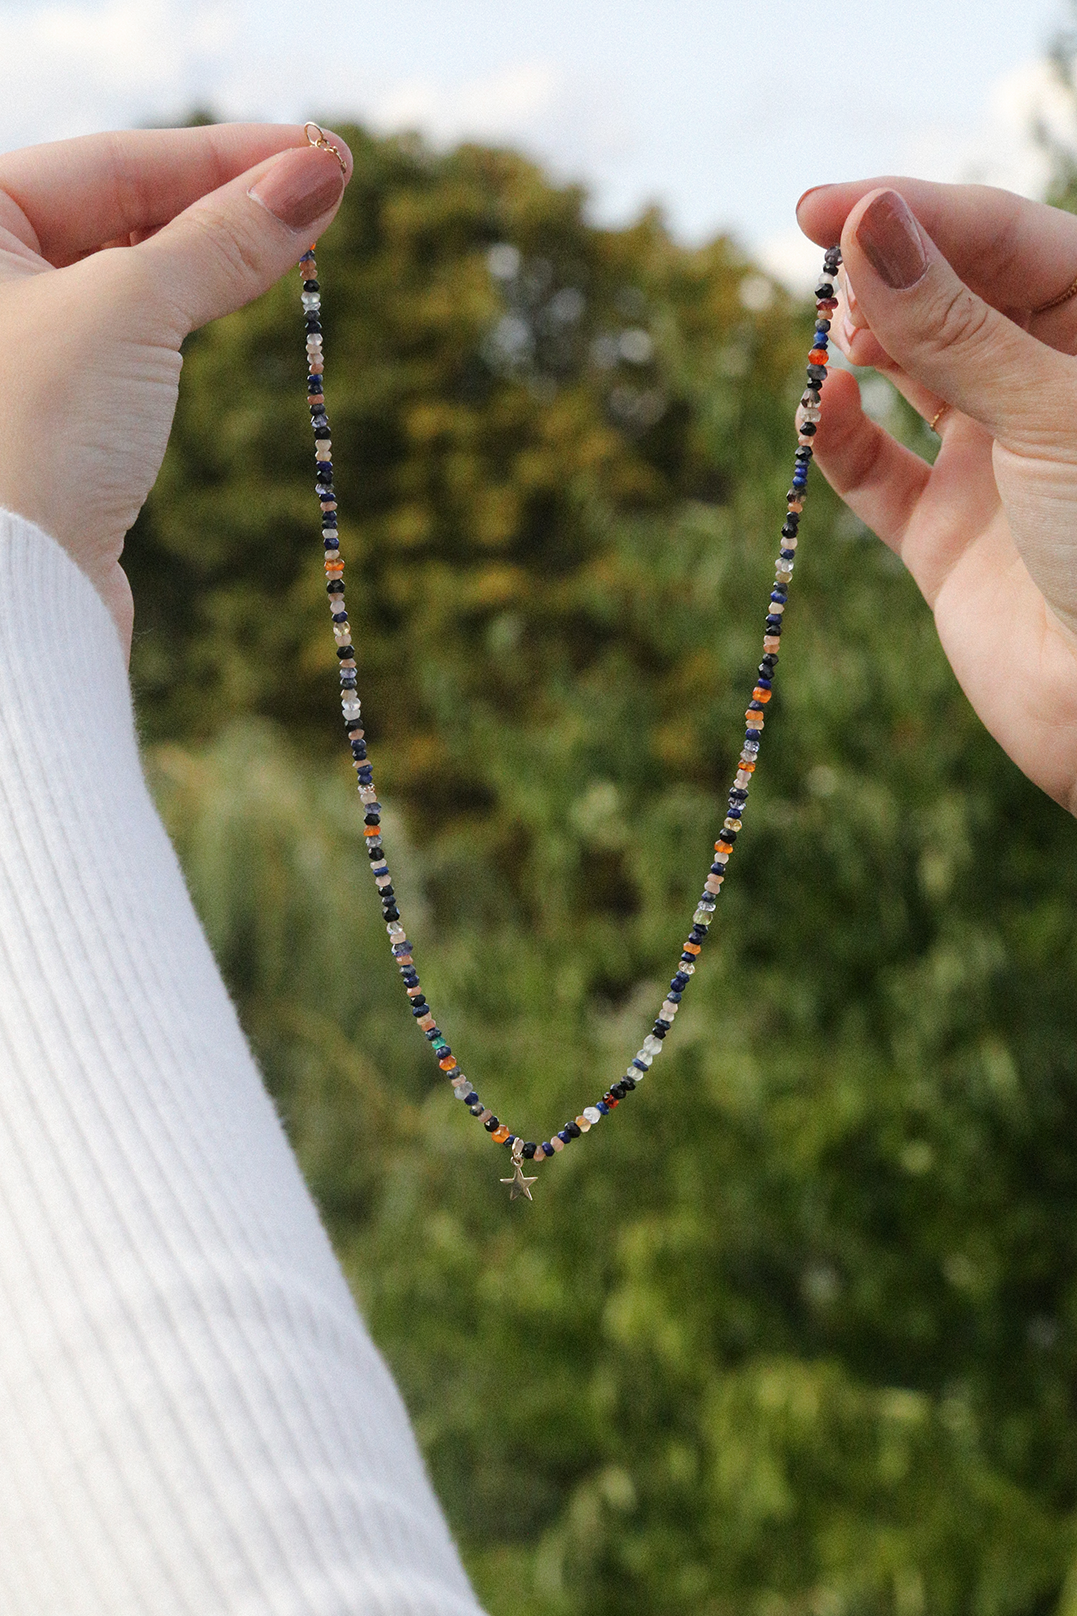 Brilhante Beaded Necklace with You're A Star Charm - Adriana Chede Jewellery